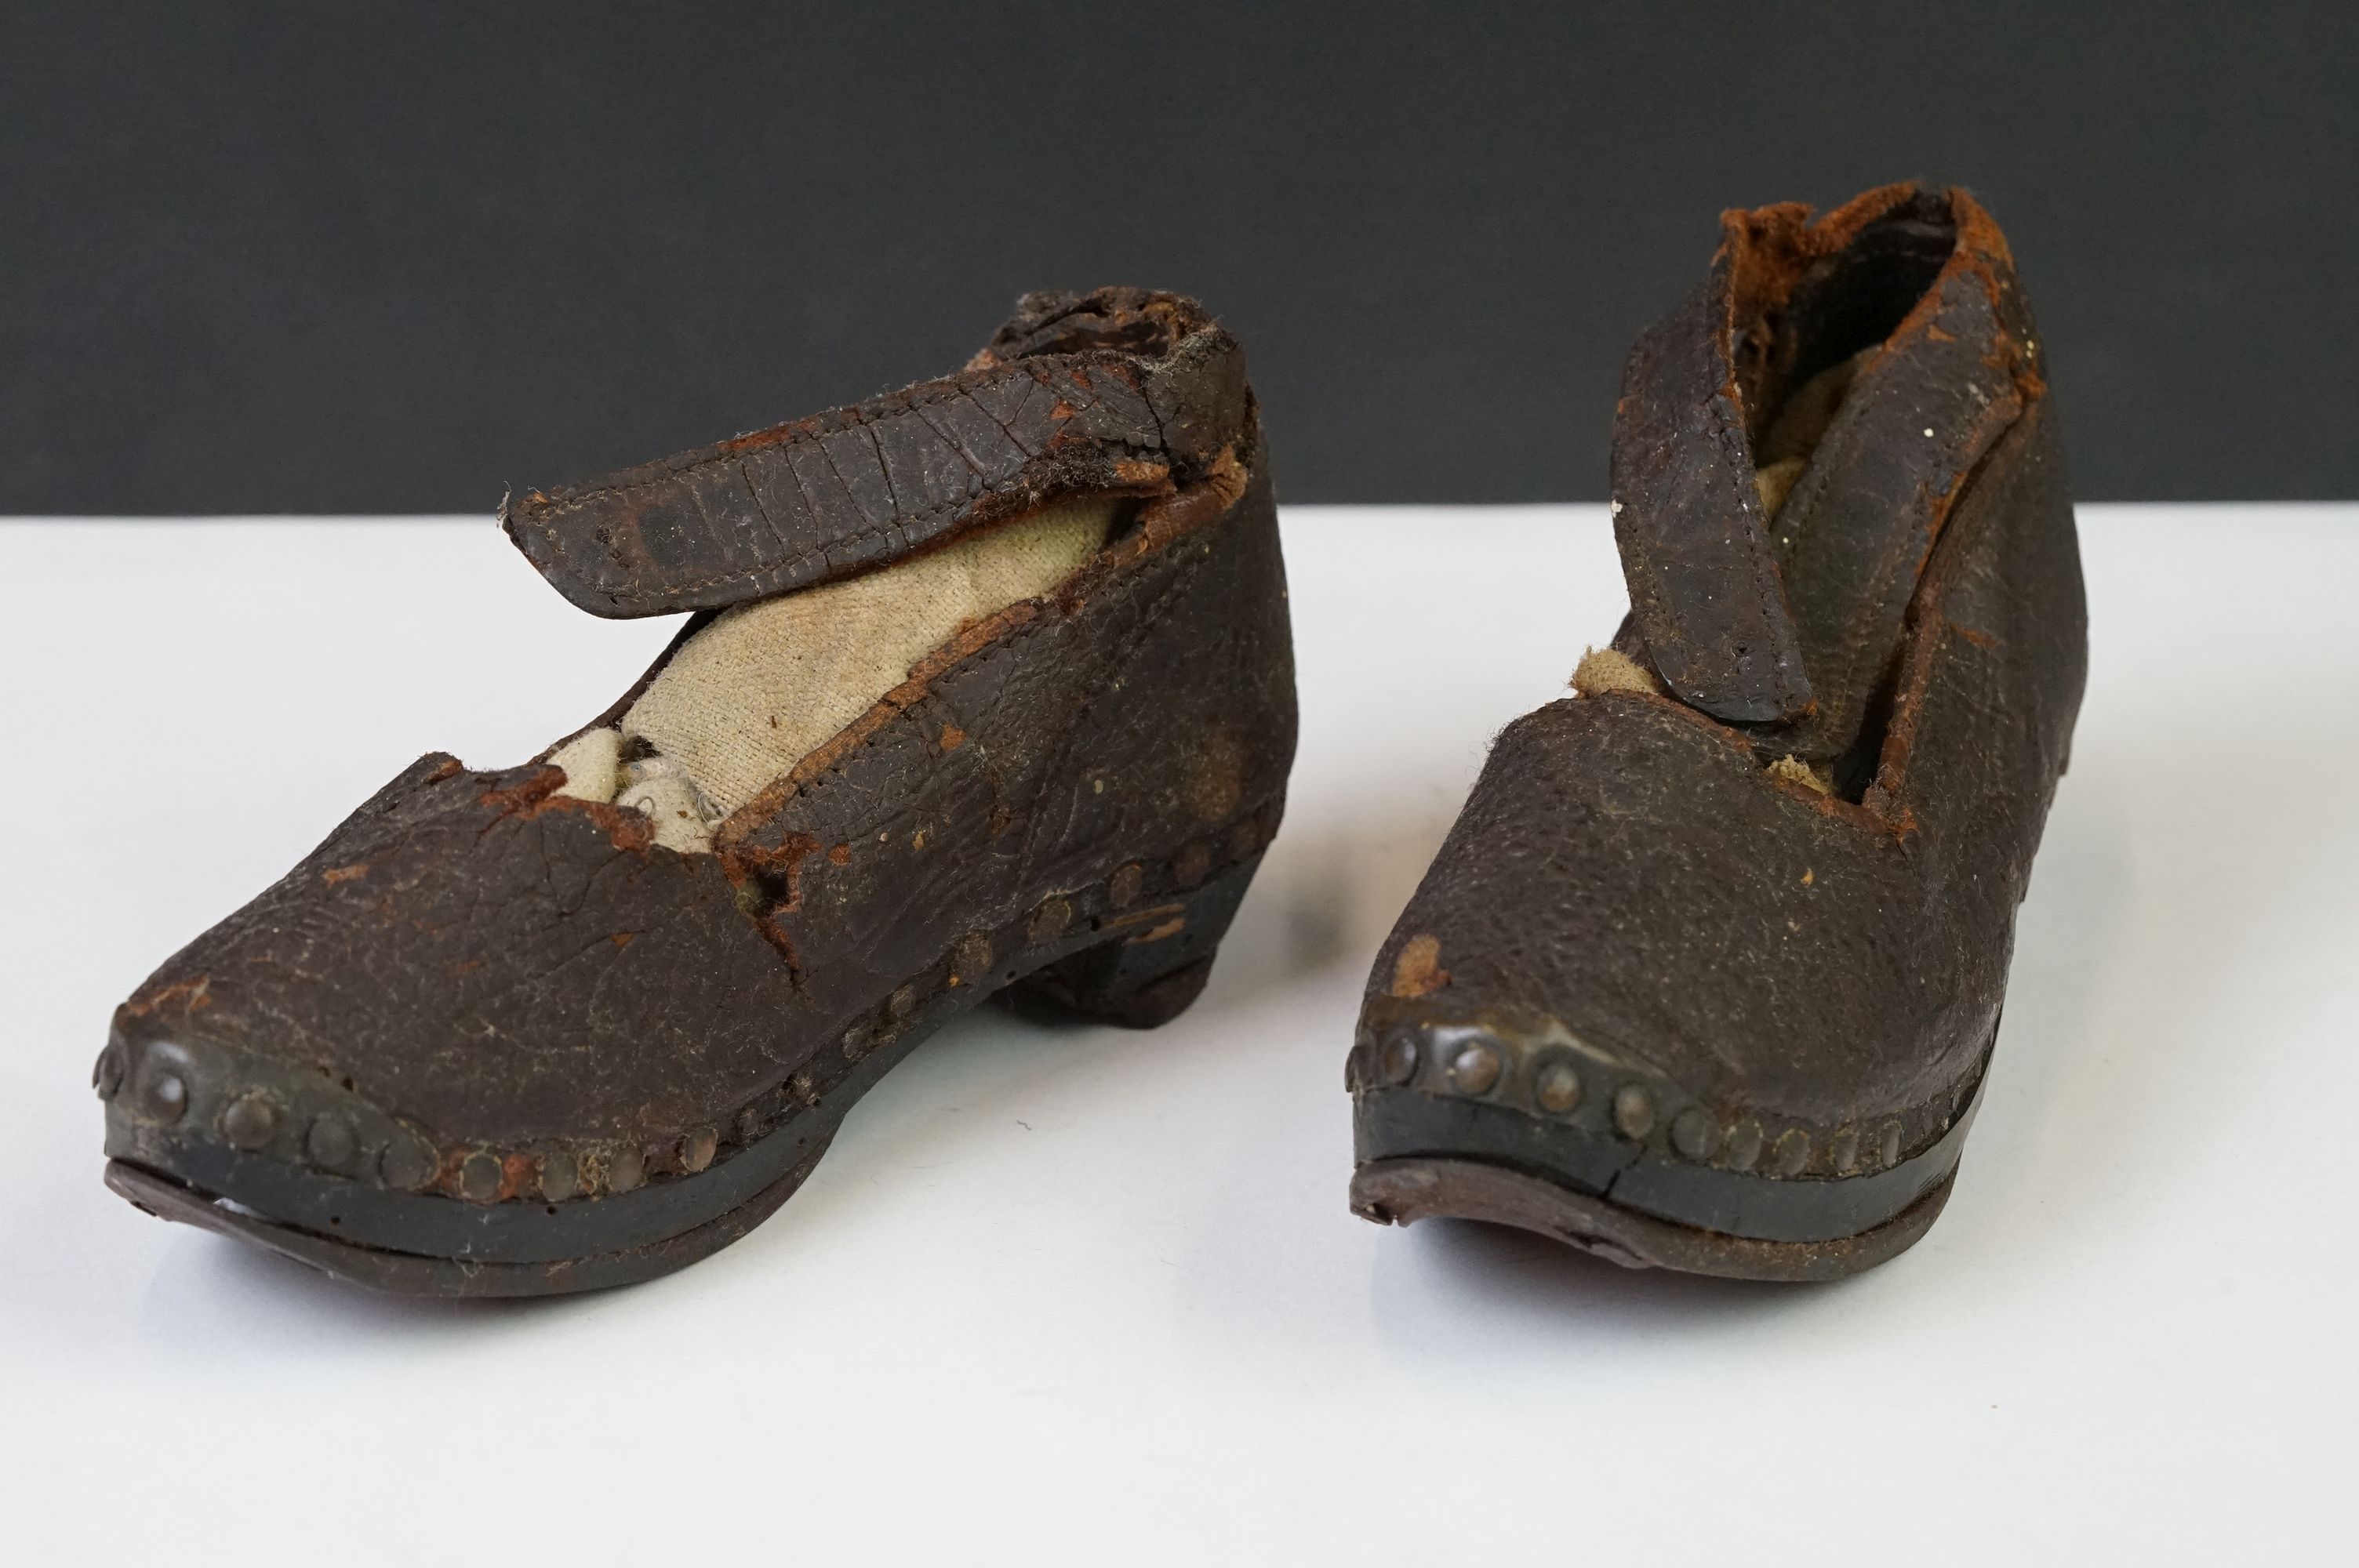 A pair of 'Latchet' leather Childs shoes c.1650-1700